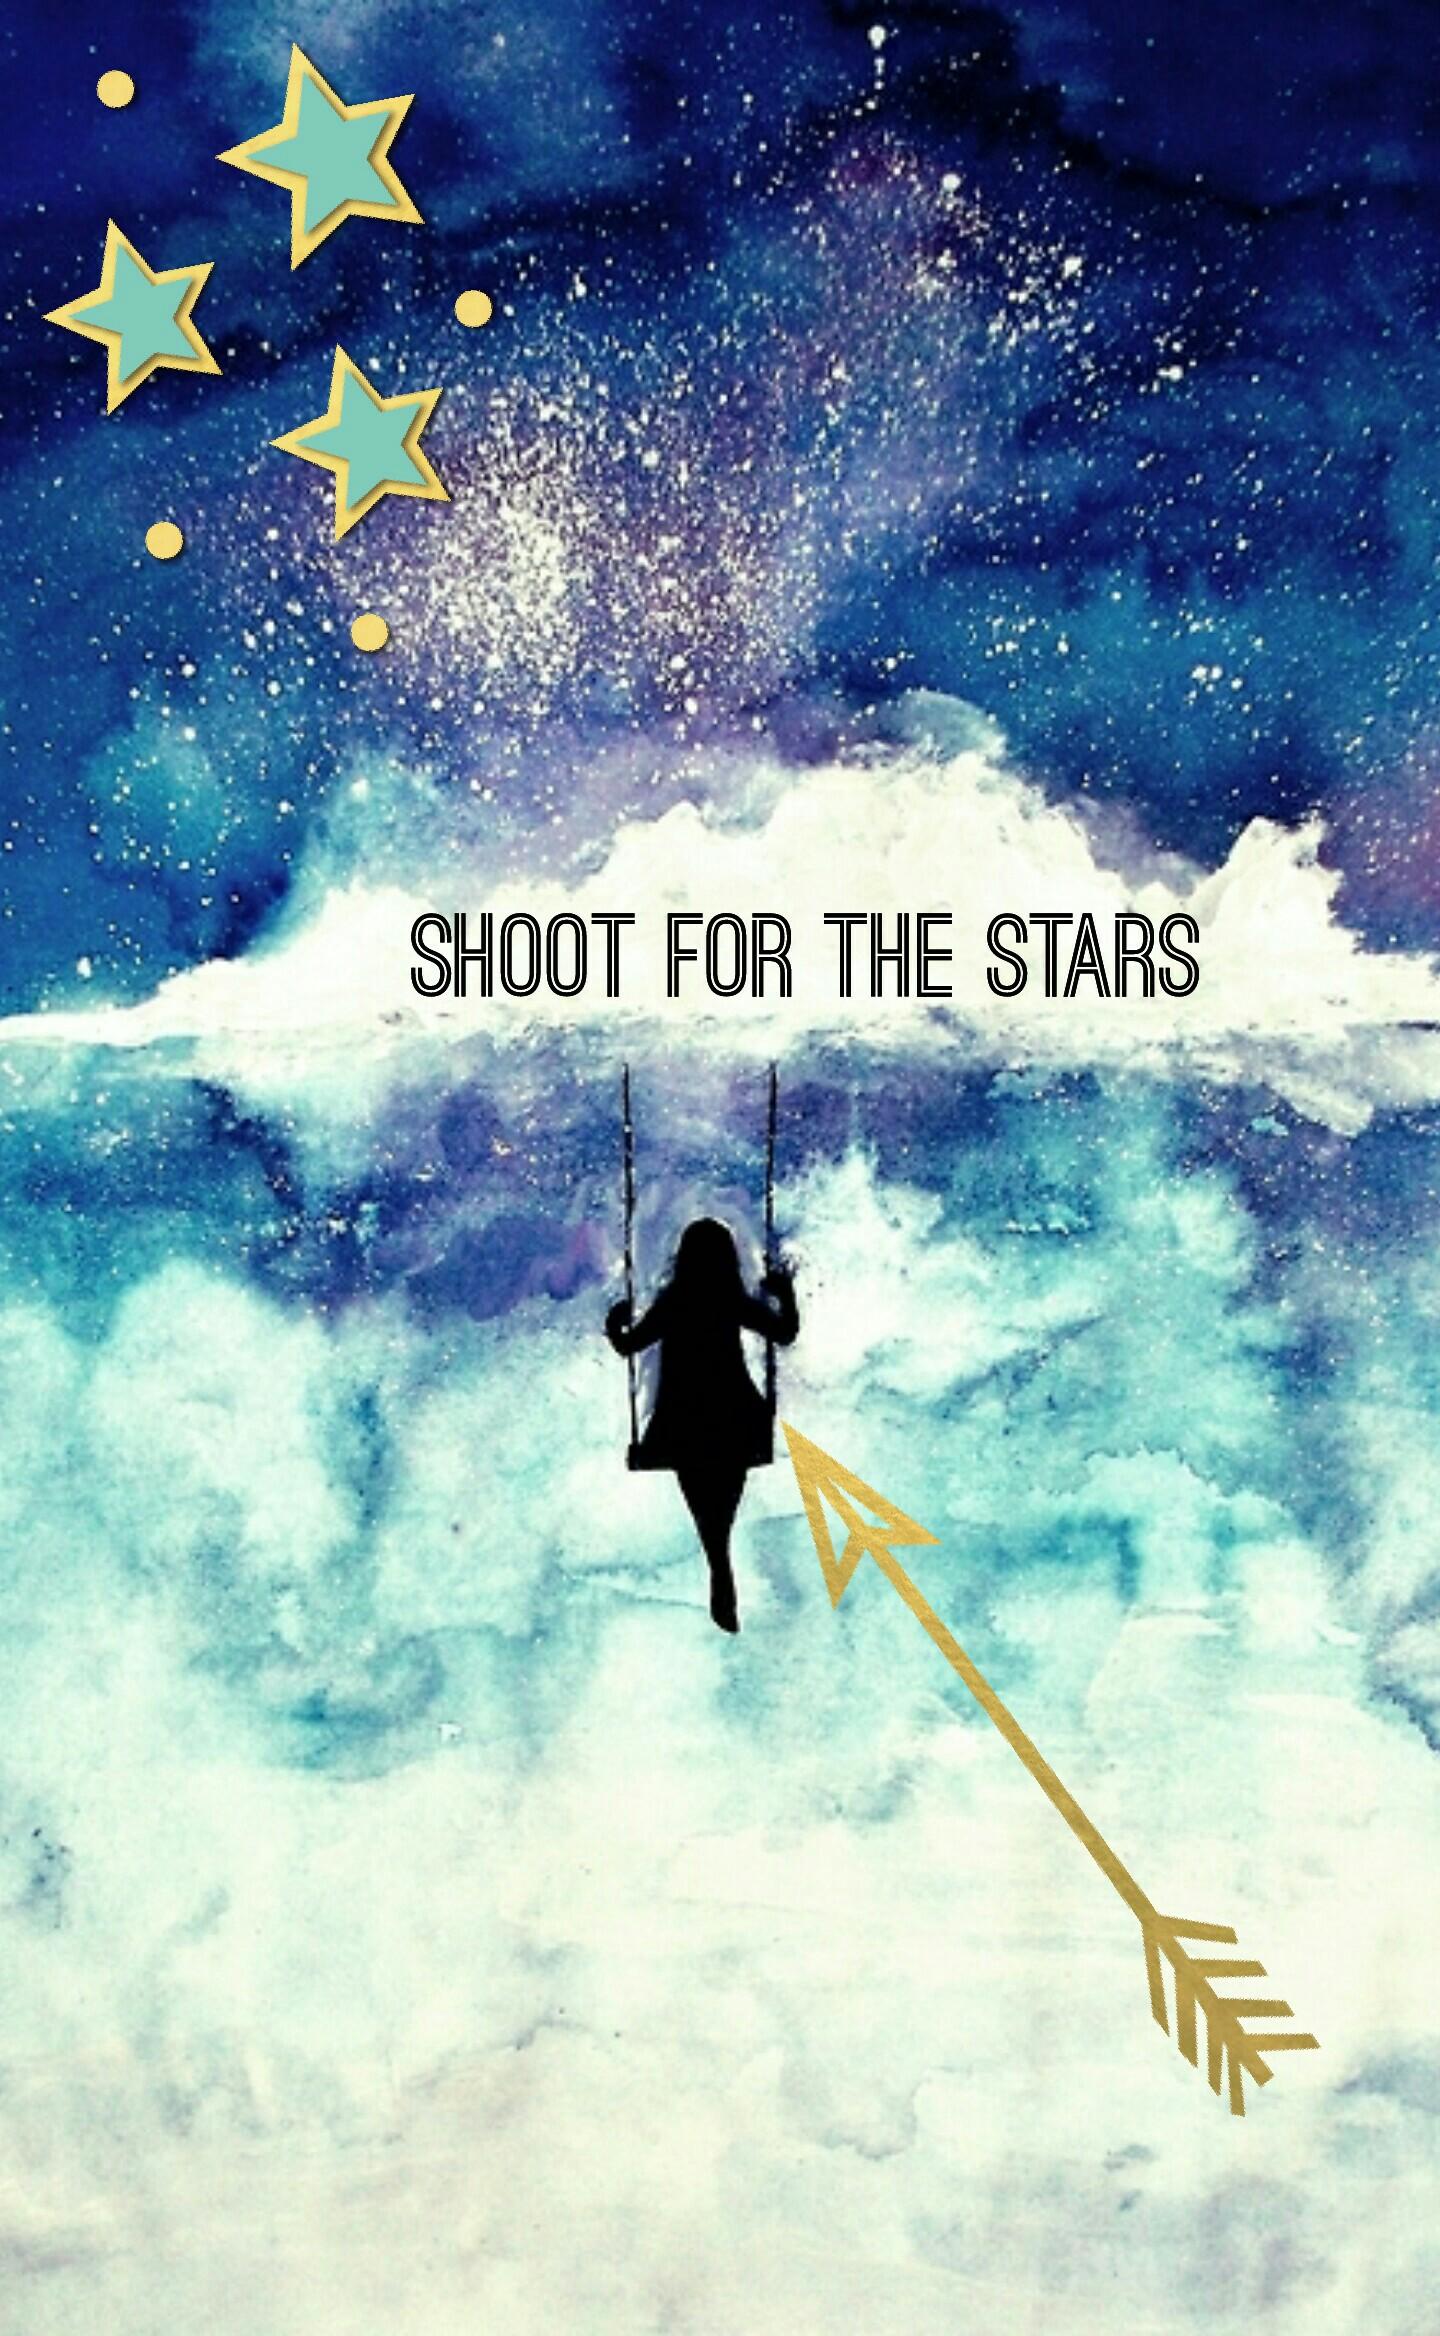 172 PicCollage: Shoot for the stars